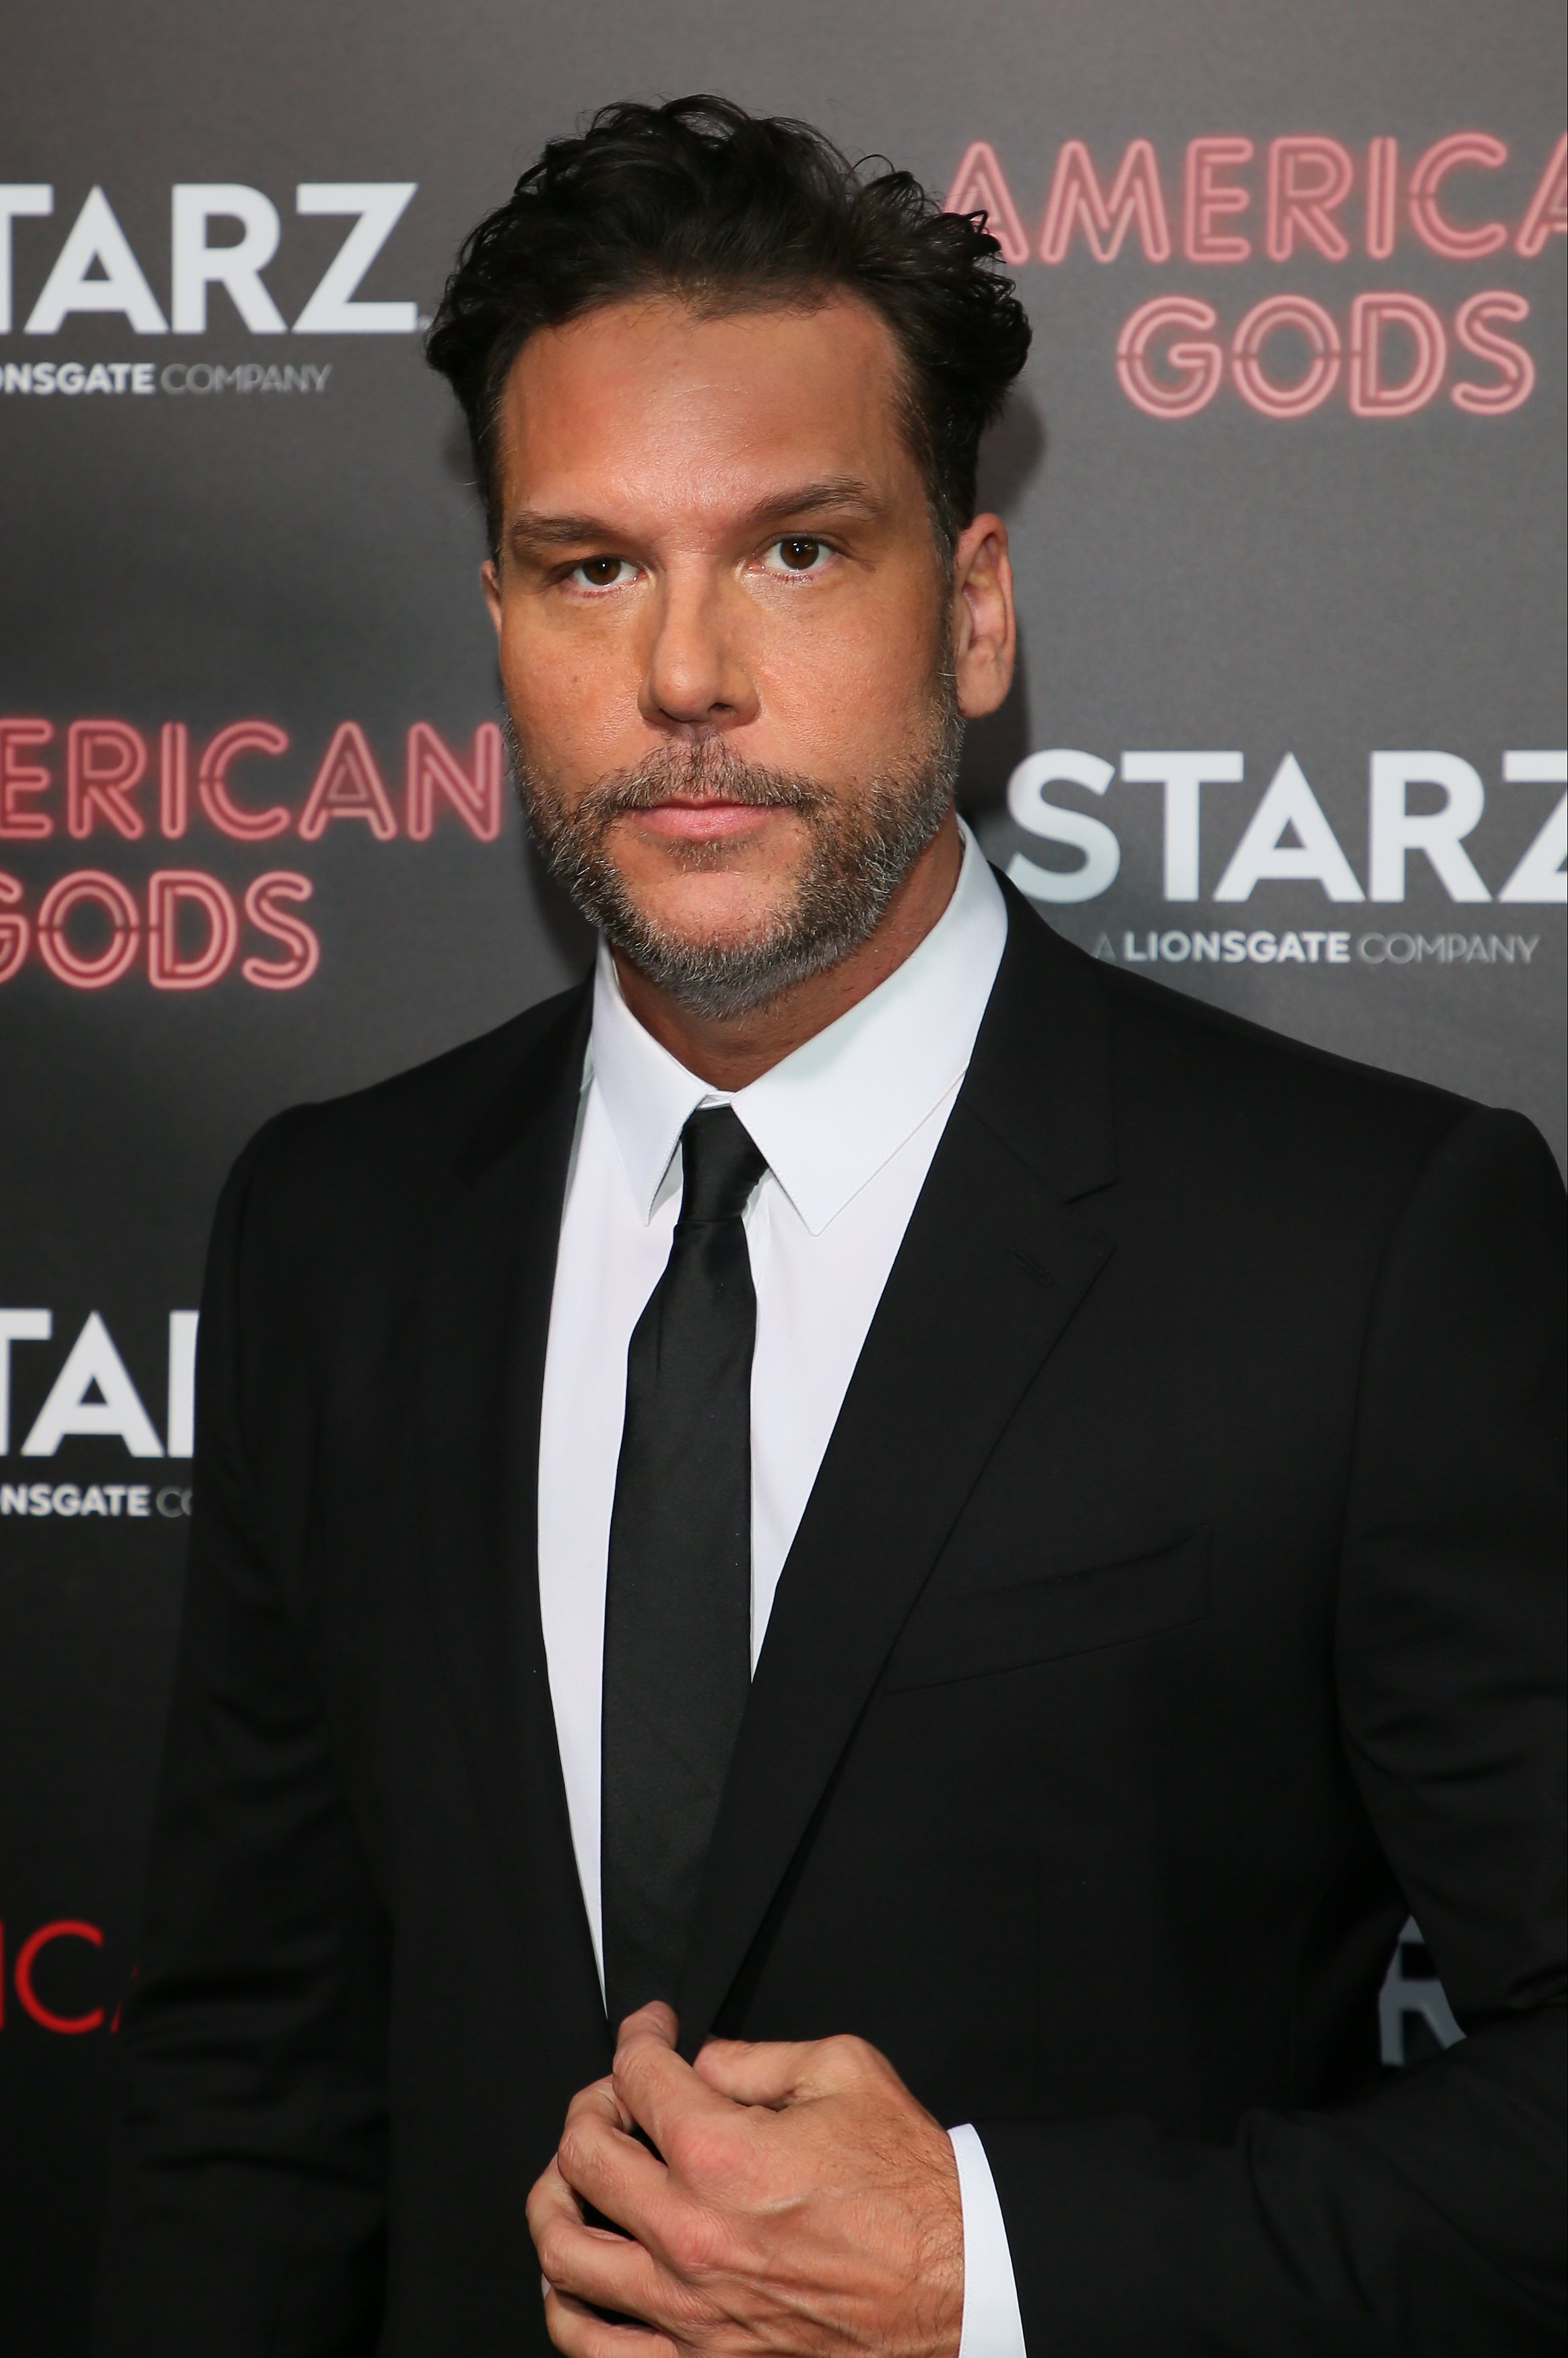 Dane Cook at the premiere of Starz’s “American Gods” in California on April 20, 2017 | Source: Getty Images 